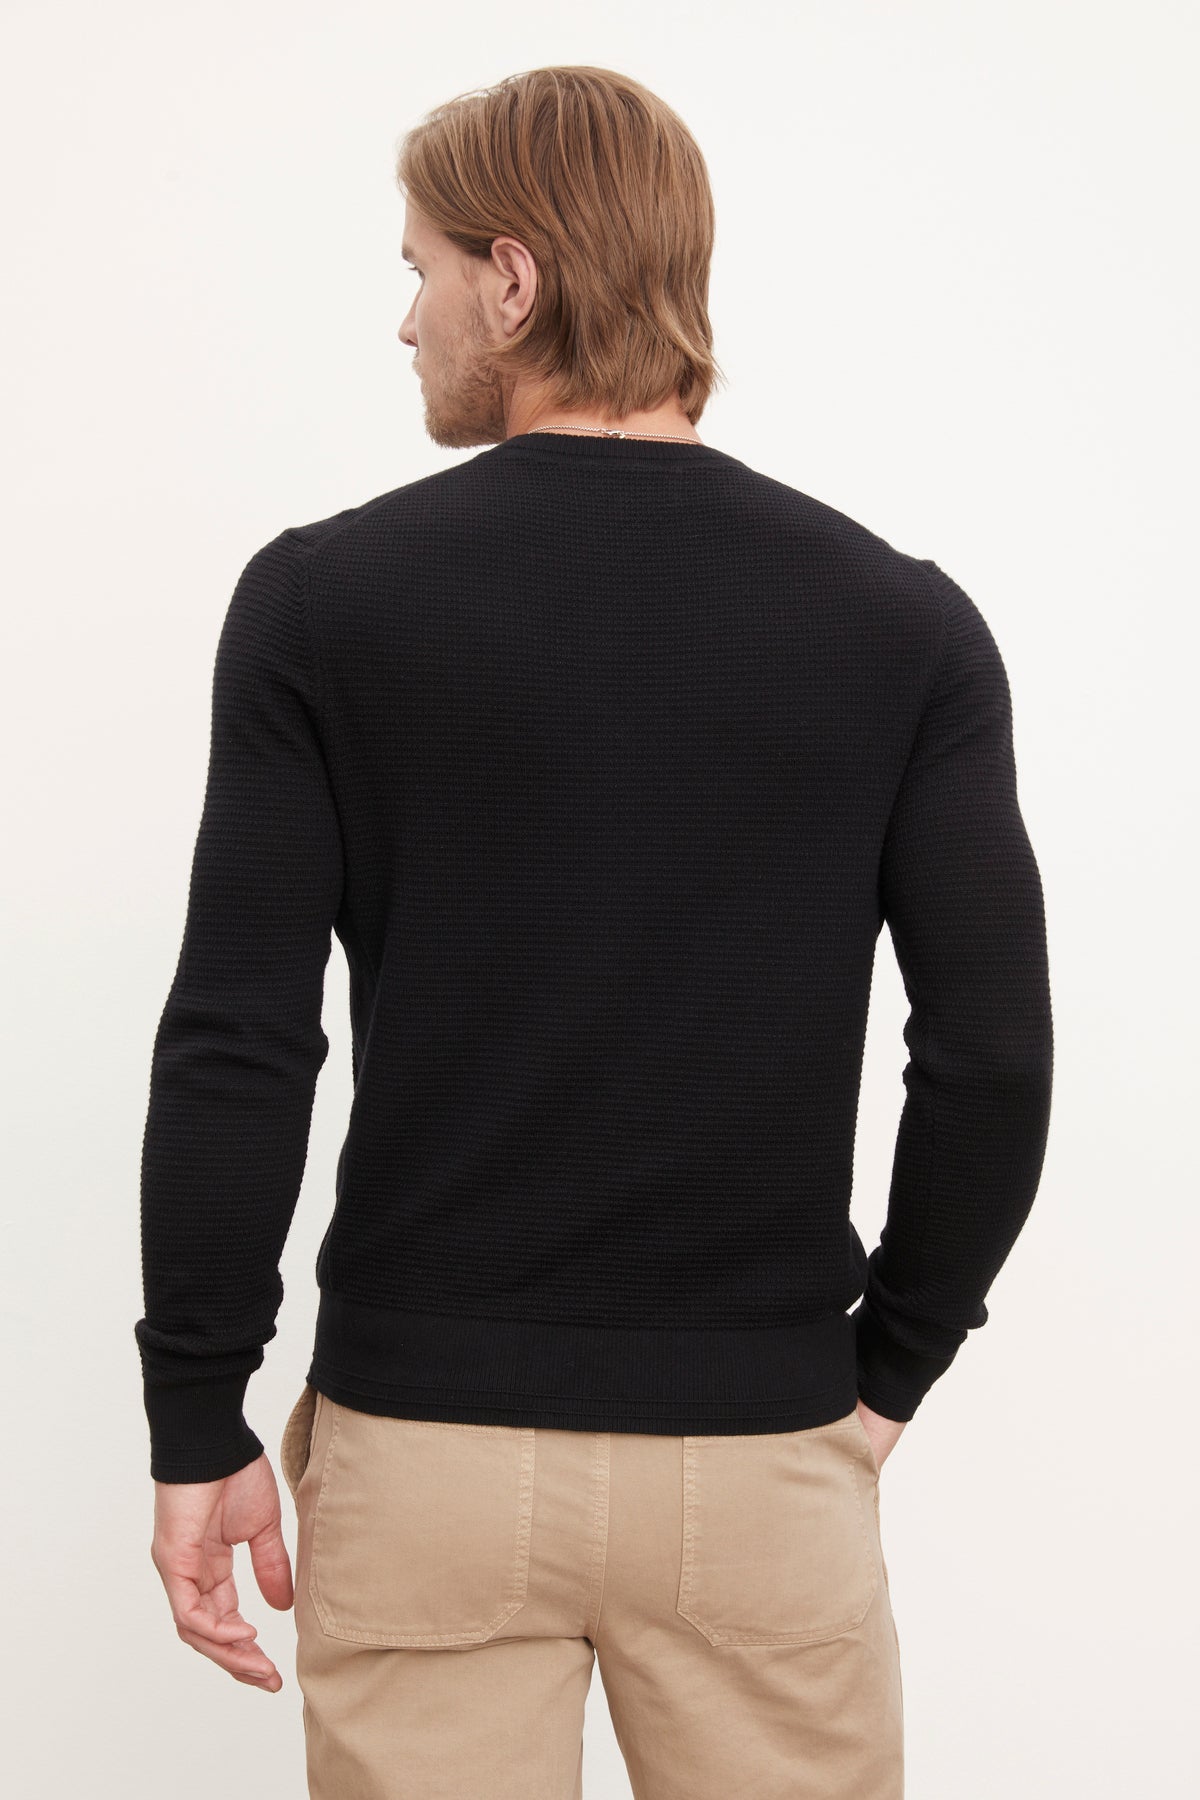   The back view of a man wearing a Velvet by Graham & Spencer ACE THERMAL CREW black sweater and khaki pants. 